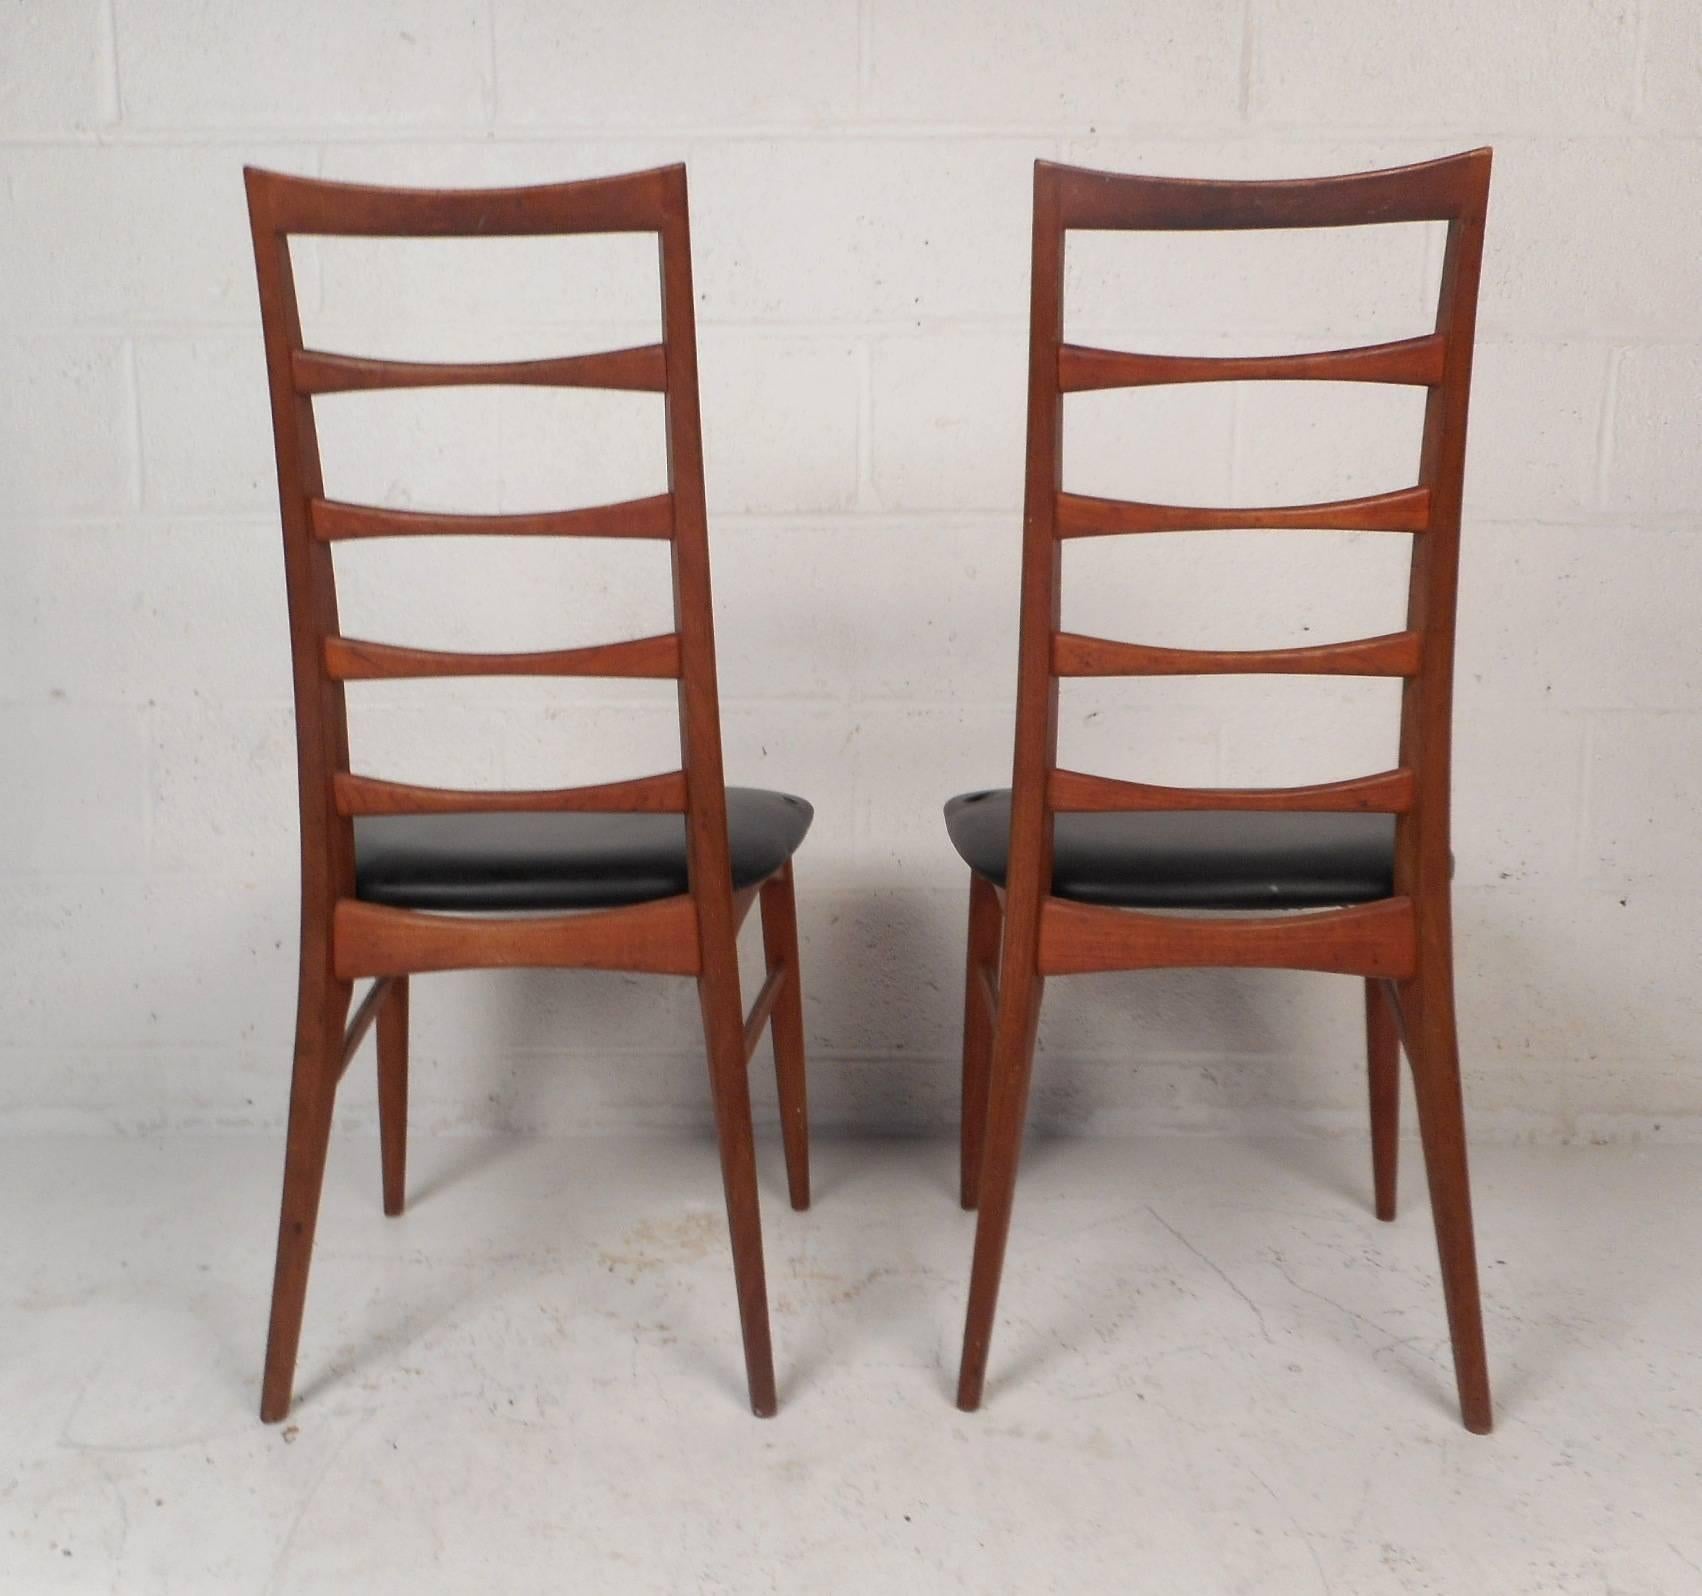 Late 20th Century Pair of Danish Mid-Century Modern Dining Chairs by Koefoeds Hornslet